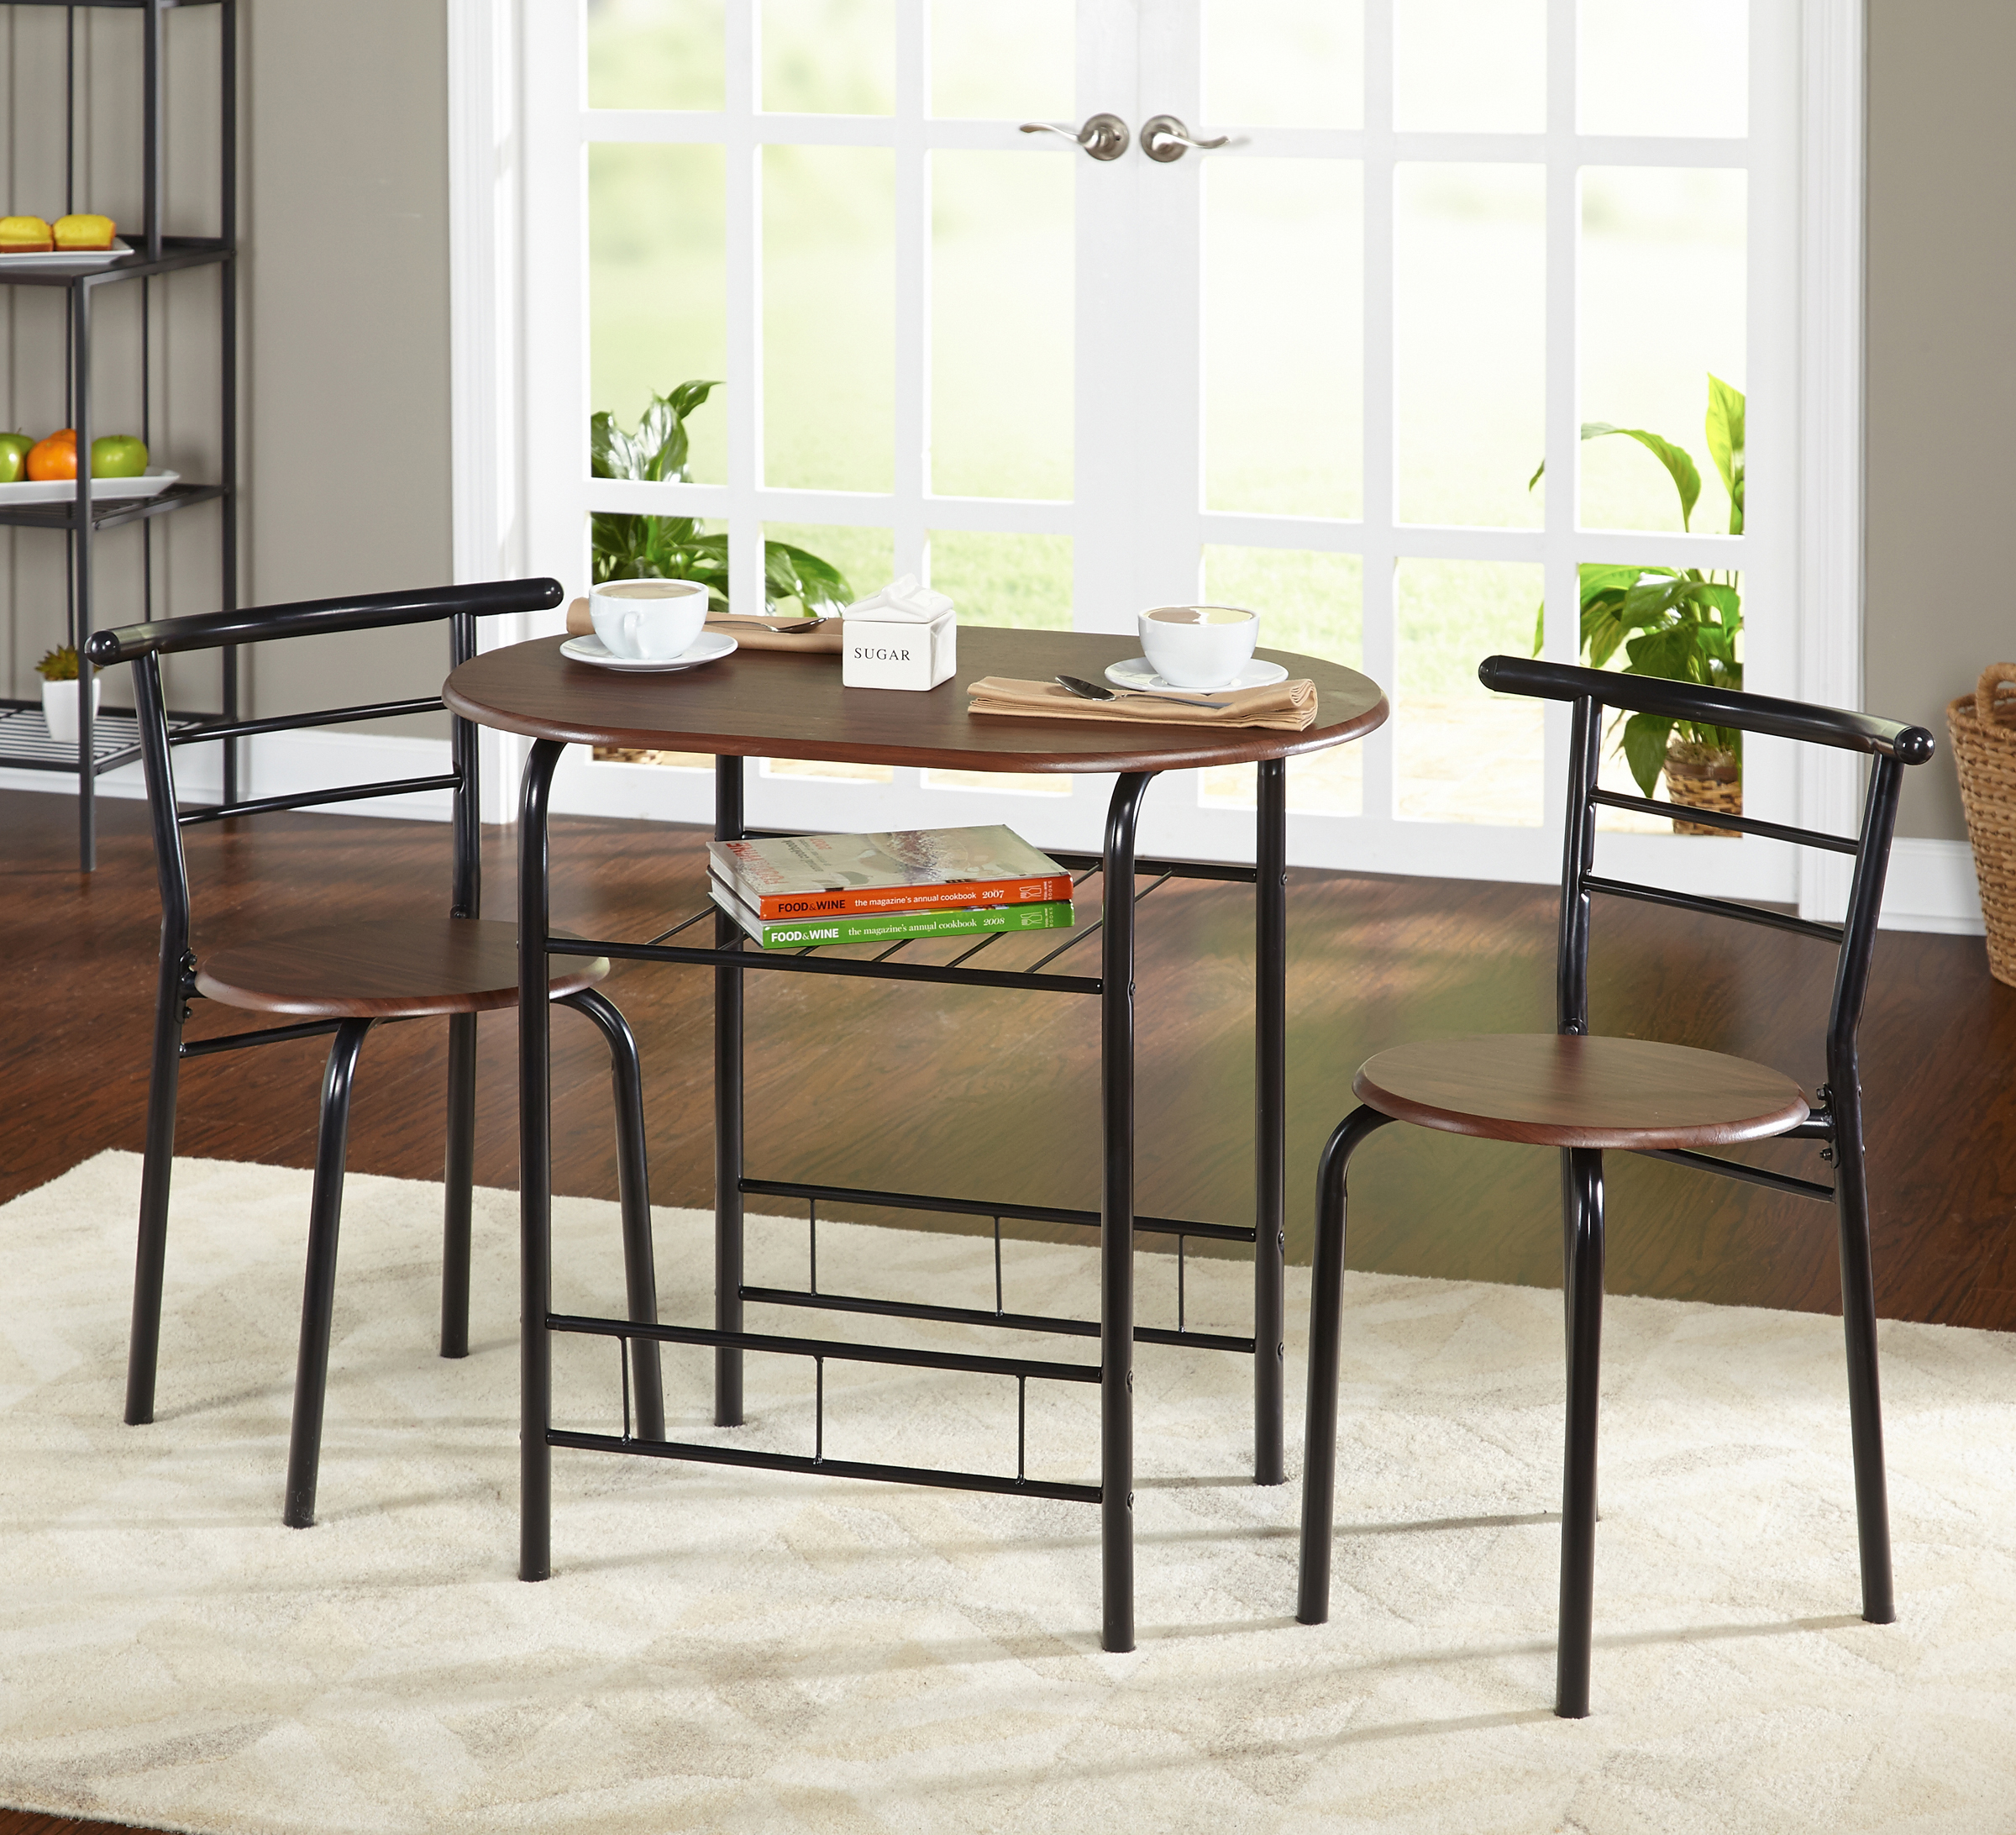 Target Marketing Systems 3 - Piece Bistro Dining Set - image 1 of 5